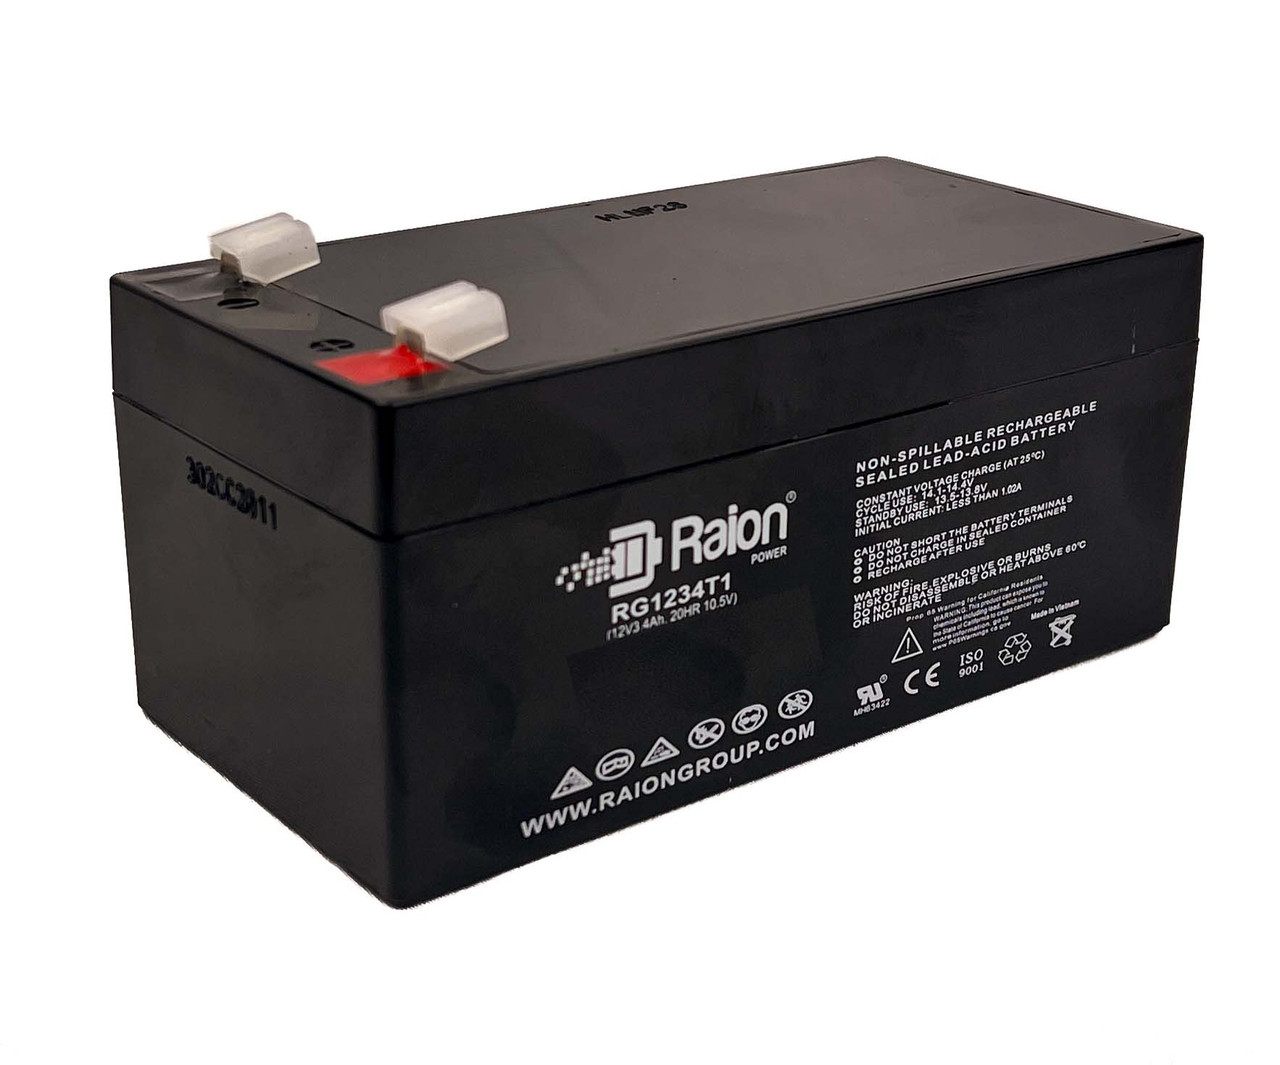 Raion Power 12V 3.4Ah Non-Spillable Replacement Battery for Amsco 503916